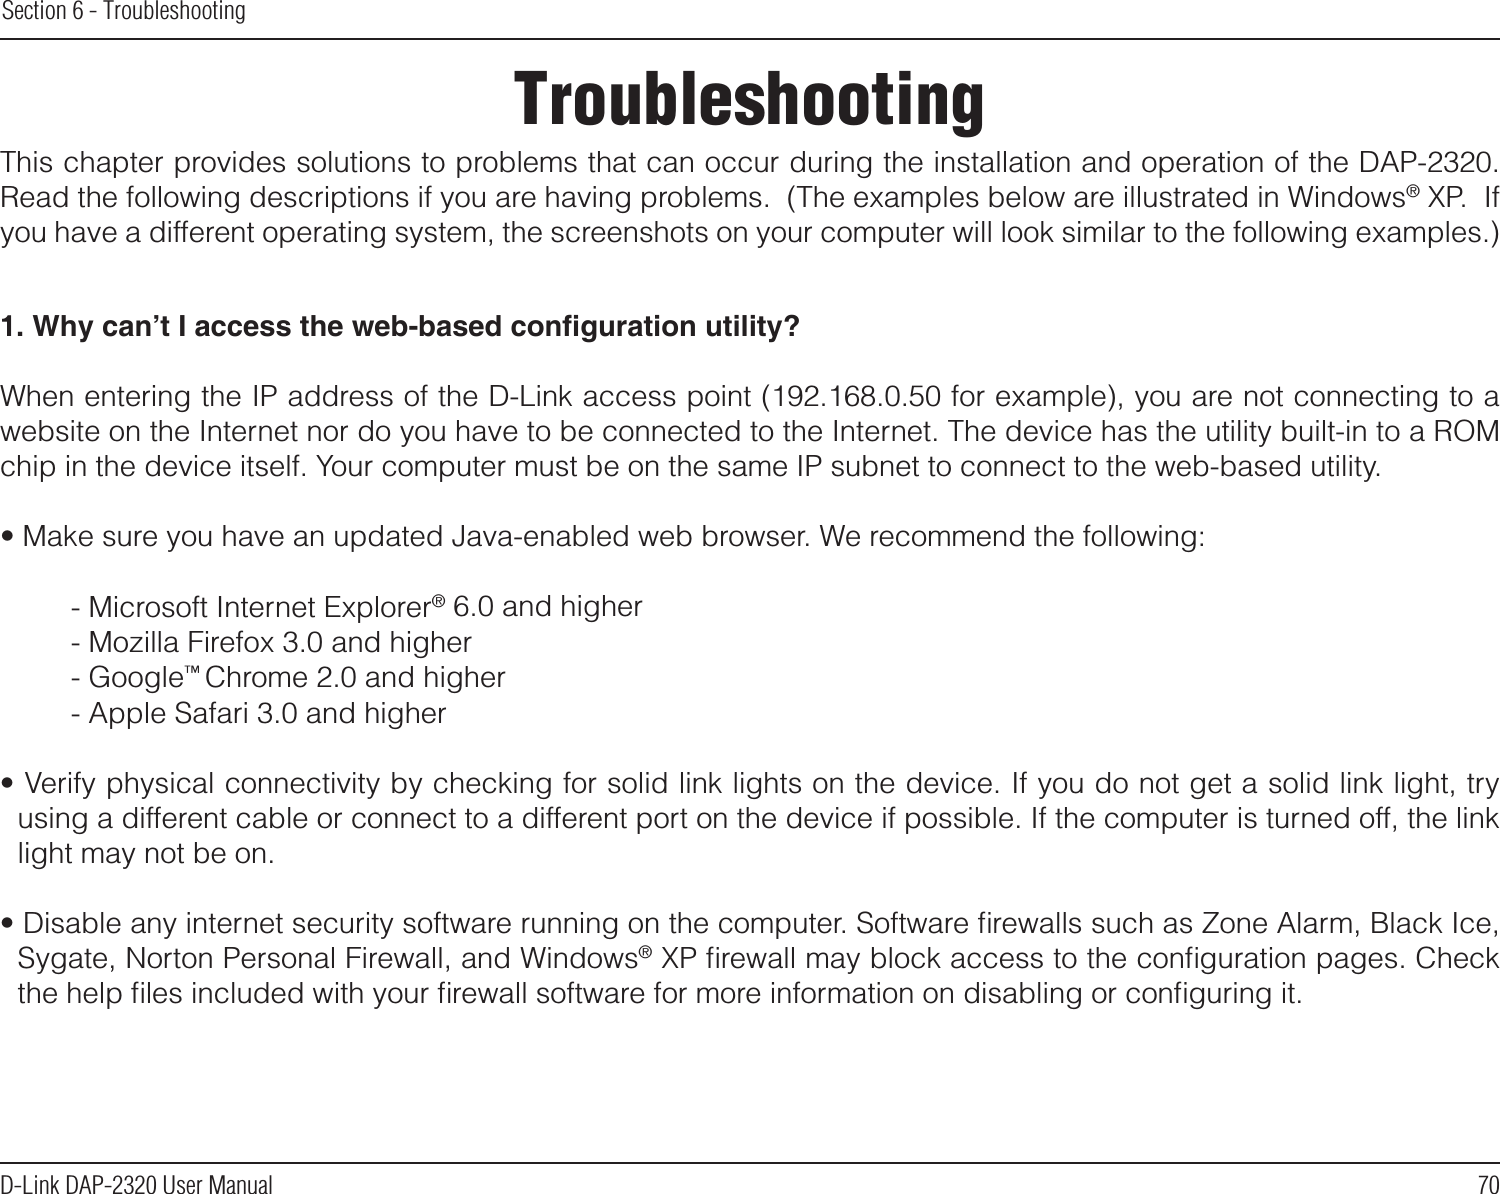 70D-Link DAP-2320 User ManualSection 6 - TroubleshootingTroubleshootingThis chapter provides solutions to problems that can occur during the installation and operation of the DAP-2320.  Read the following descriptions if you are having problems.  (The examples below are illustrated in Windows® XP.  If you have a different operating system, the screenshots on your computer will look similar to the following examples.)1. Why can’t I access the web-based conguration utility?When entering the IP address of the D-Link access point (192.168.0.50 for example), you are not connecting to a website on the Internet nor do you have to be connected to the Internet. The device has the utility built-in to a ROM chip in the device itself. Your computer must be on the same IP subnet to connect to the web-based utility. • Make sure you have an updated Java-enabled web browser. We recommend the following: - Microsoft Internet Explorer® 6.0 and higher- Mozilla Firefox 3.0 and higher- Google™ Chrome 2.0 and higher- Apple Safari 3.0 and higher• Verify physical connectivity by checking for solid link lights on the device. If you do not get a solid link light, try using a different cable or connect to a different port on the device if possible. If the computer is turned off, the link light may not be on.• Disable any internet security software running on the computer. Software ﬁrewalls such as Zone Alarm, Black Ice, Sygate, Norton Personal Firewall, and Windows® XP ﬁrewall may block access to the conﬁguration pages. Check the help ﬁles included with your ﬁrewall software for more information on disabling or conﬁguring it.